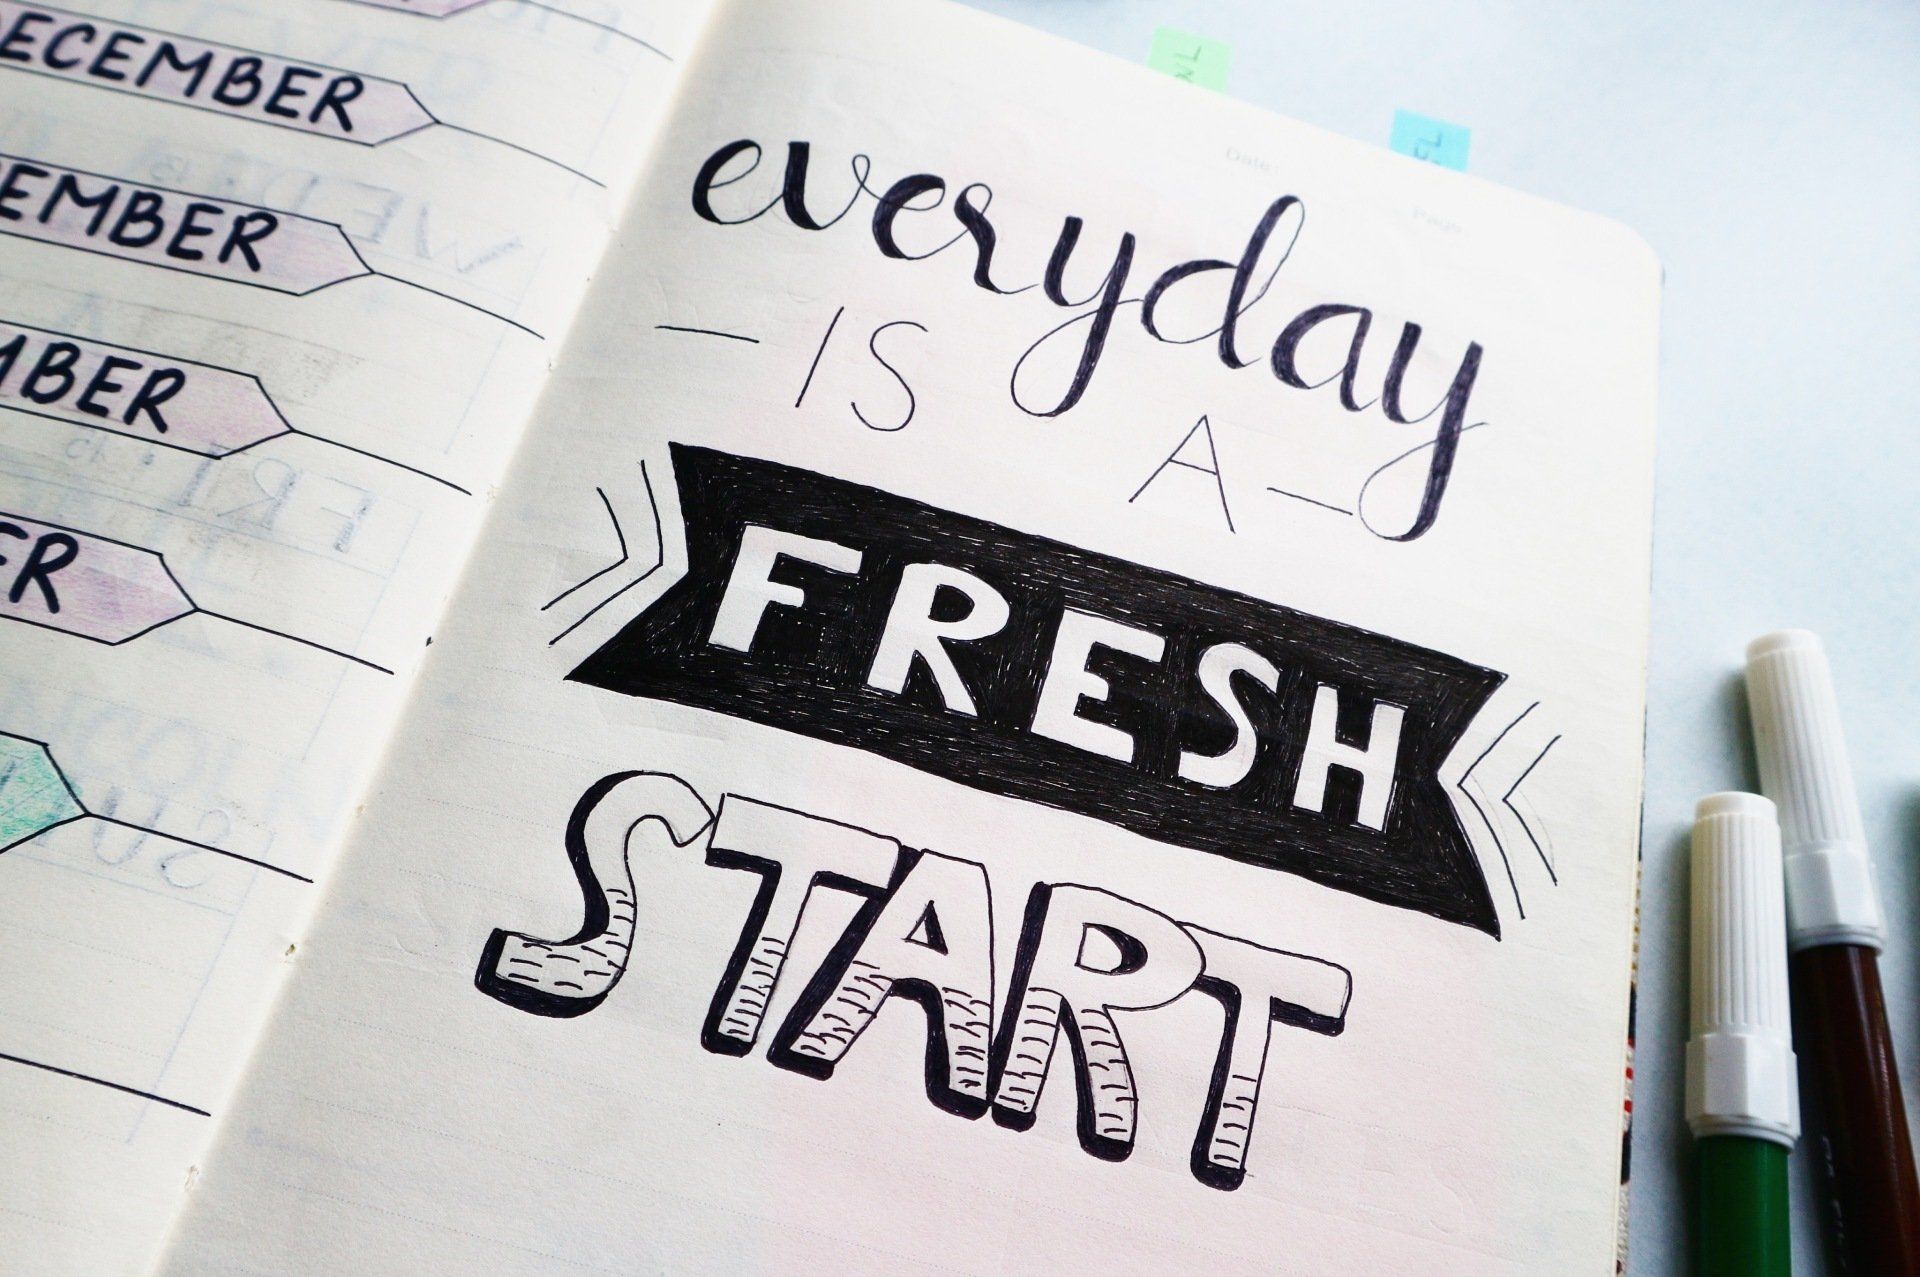 Every Day is a Fresh Start